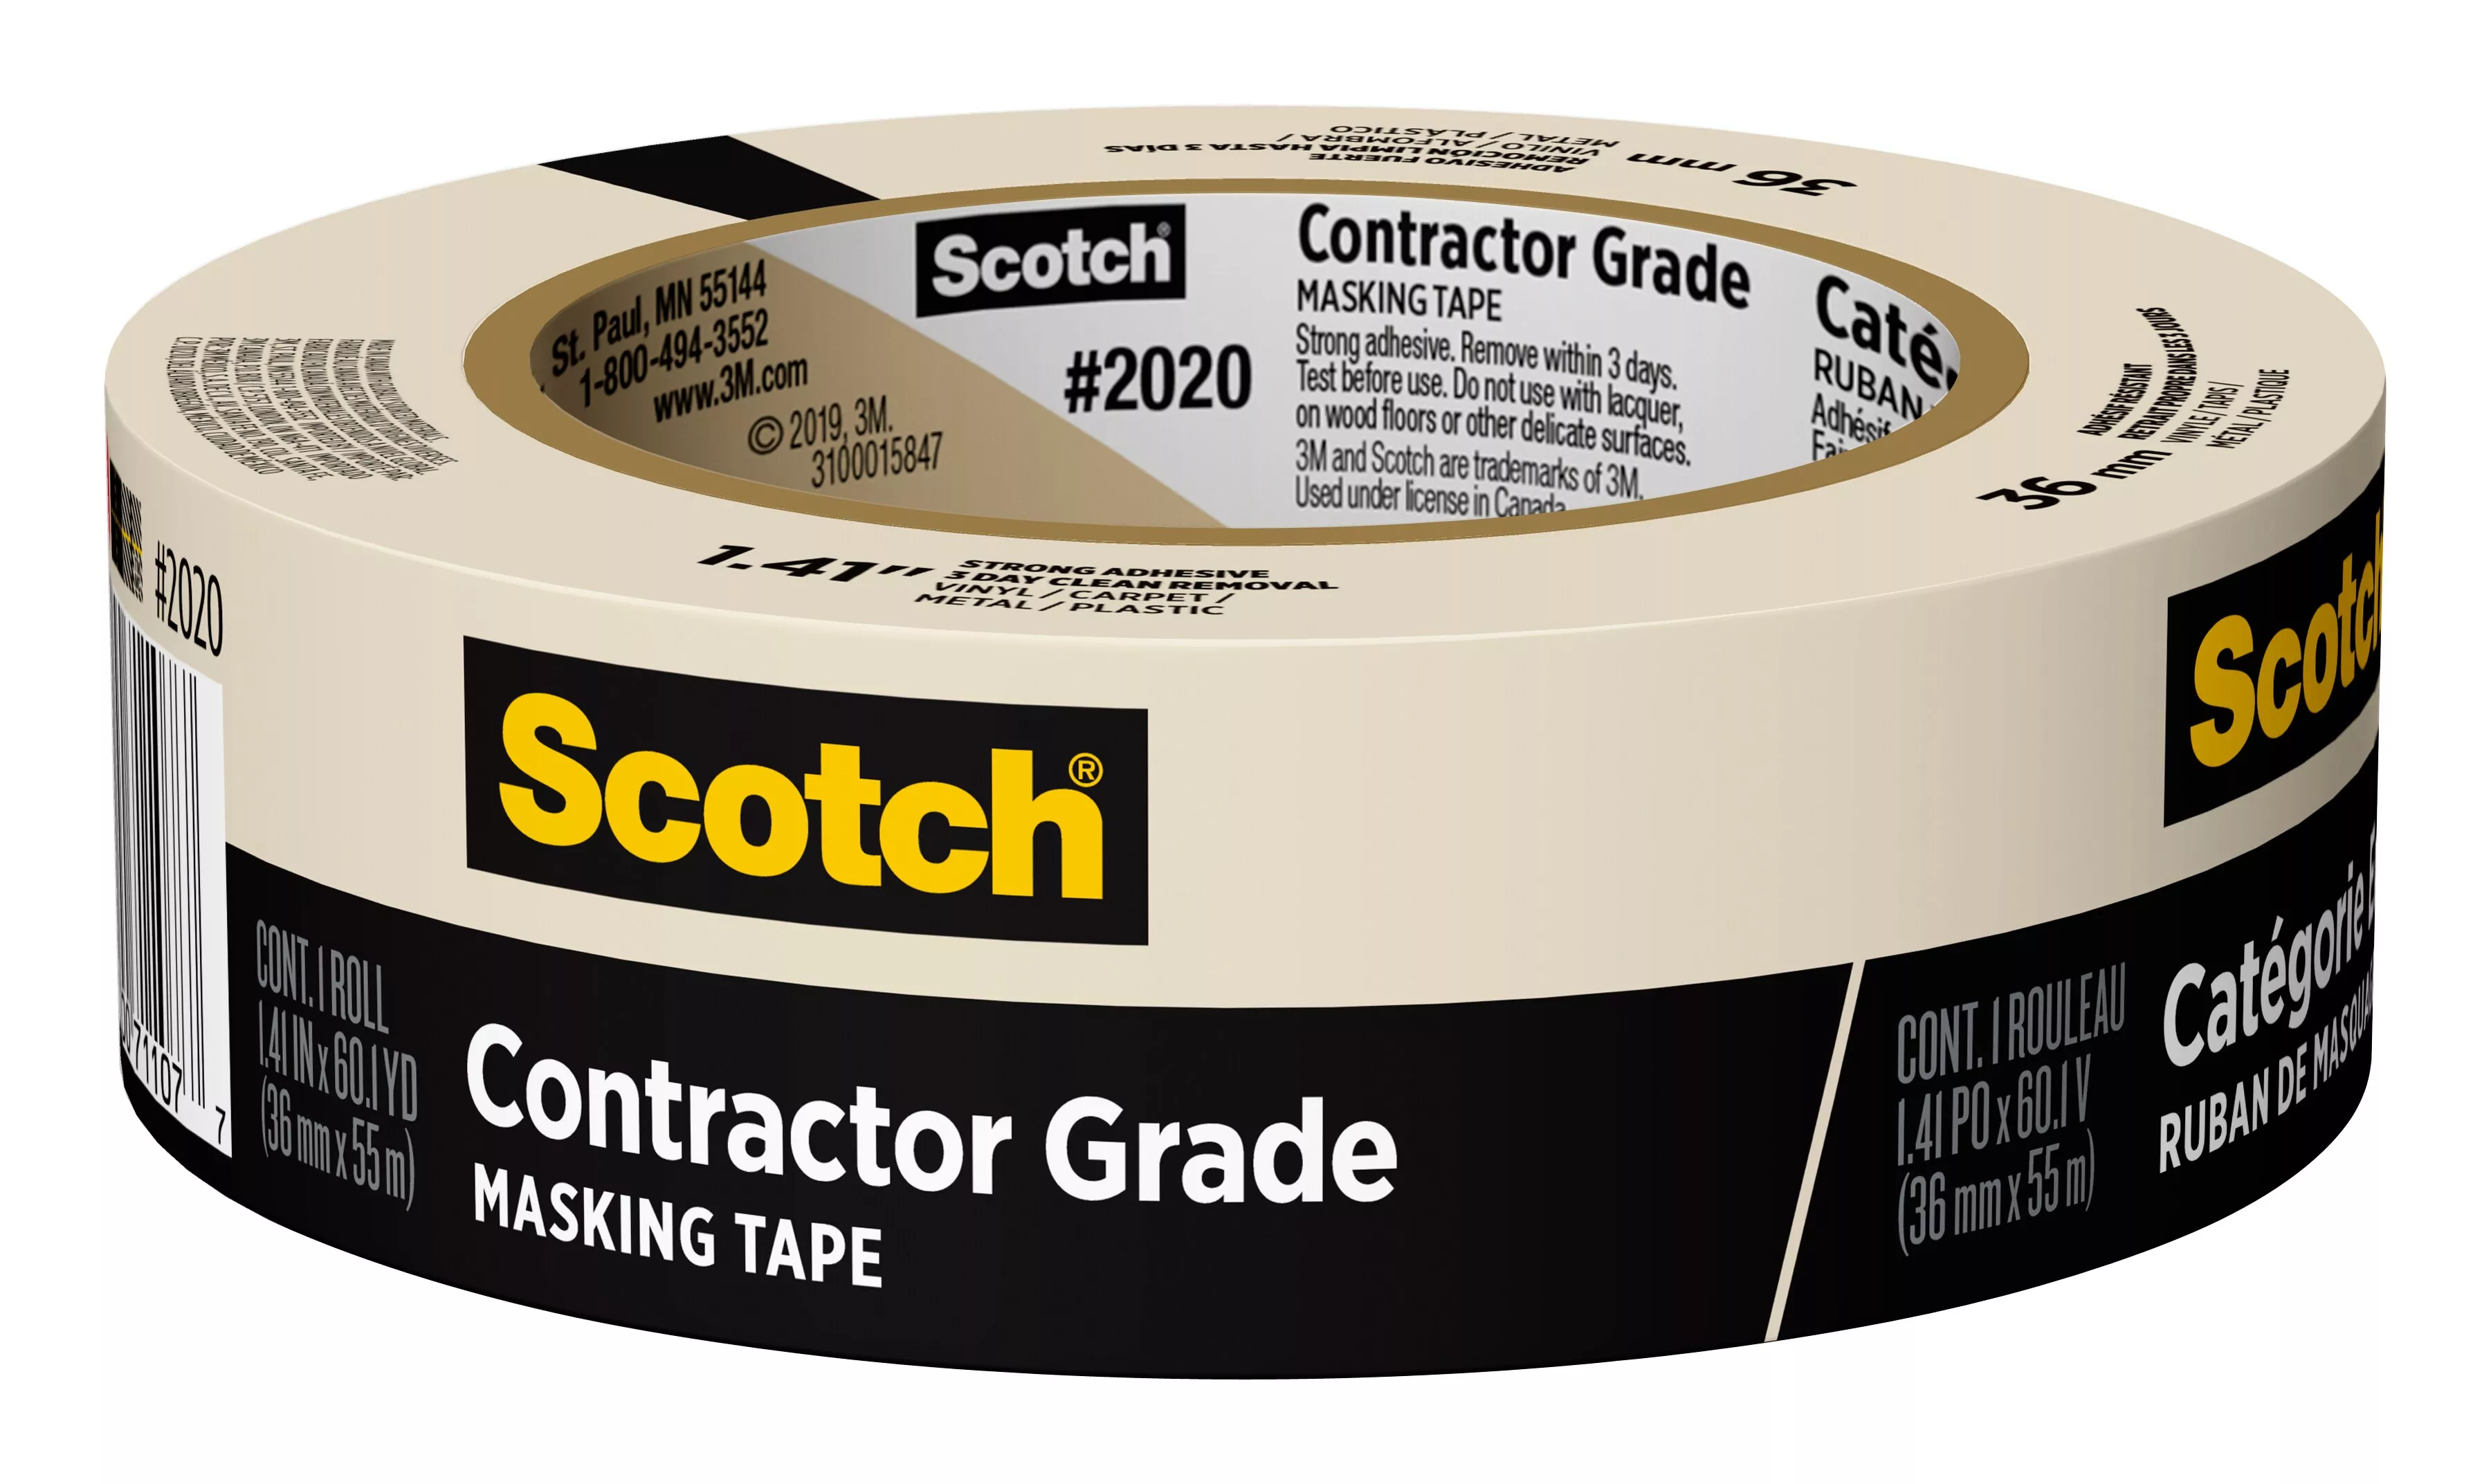 Scotch® Contractor Grade Masking Tape 2020-36AP, 1.41 in x 60.1 yd (36mm
x 55m)